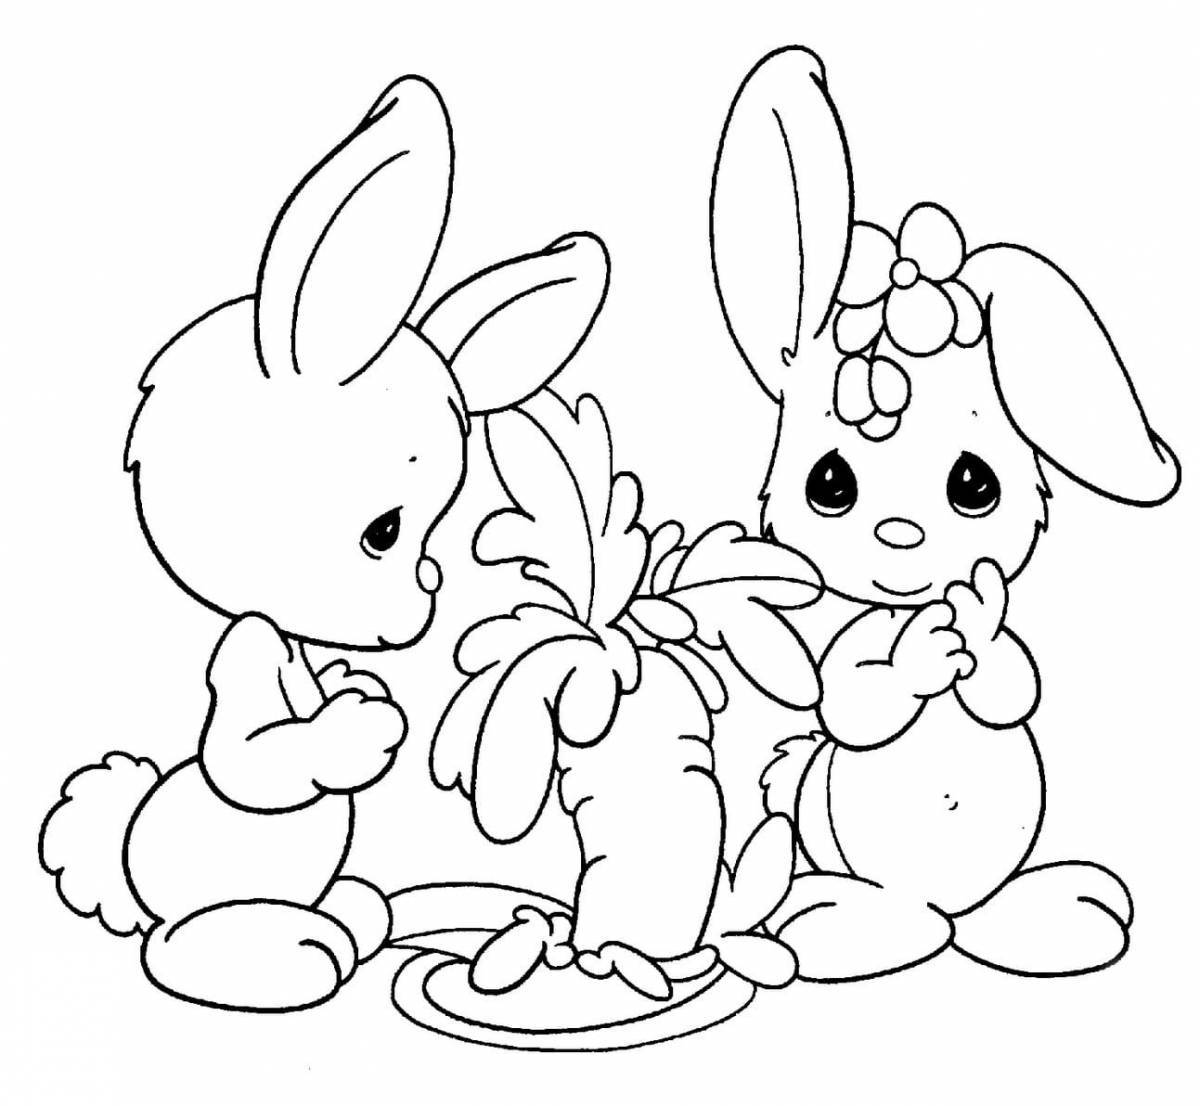 Animated rabbit coloring book for kids